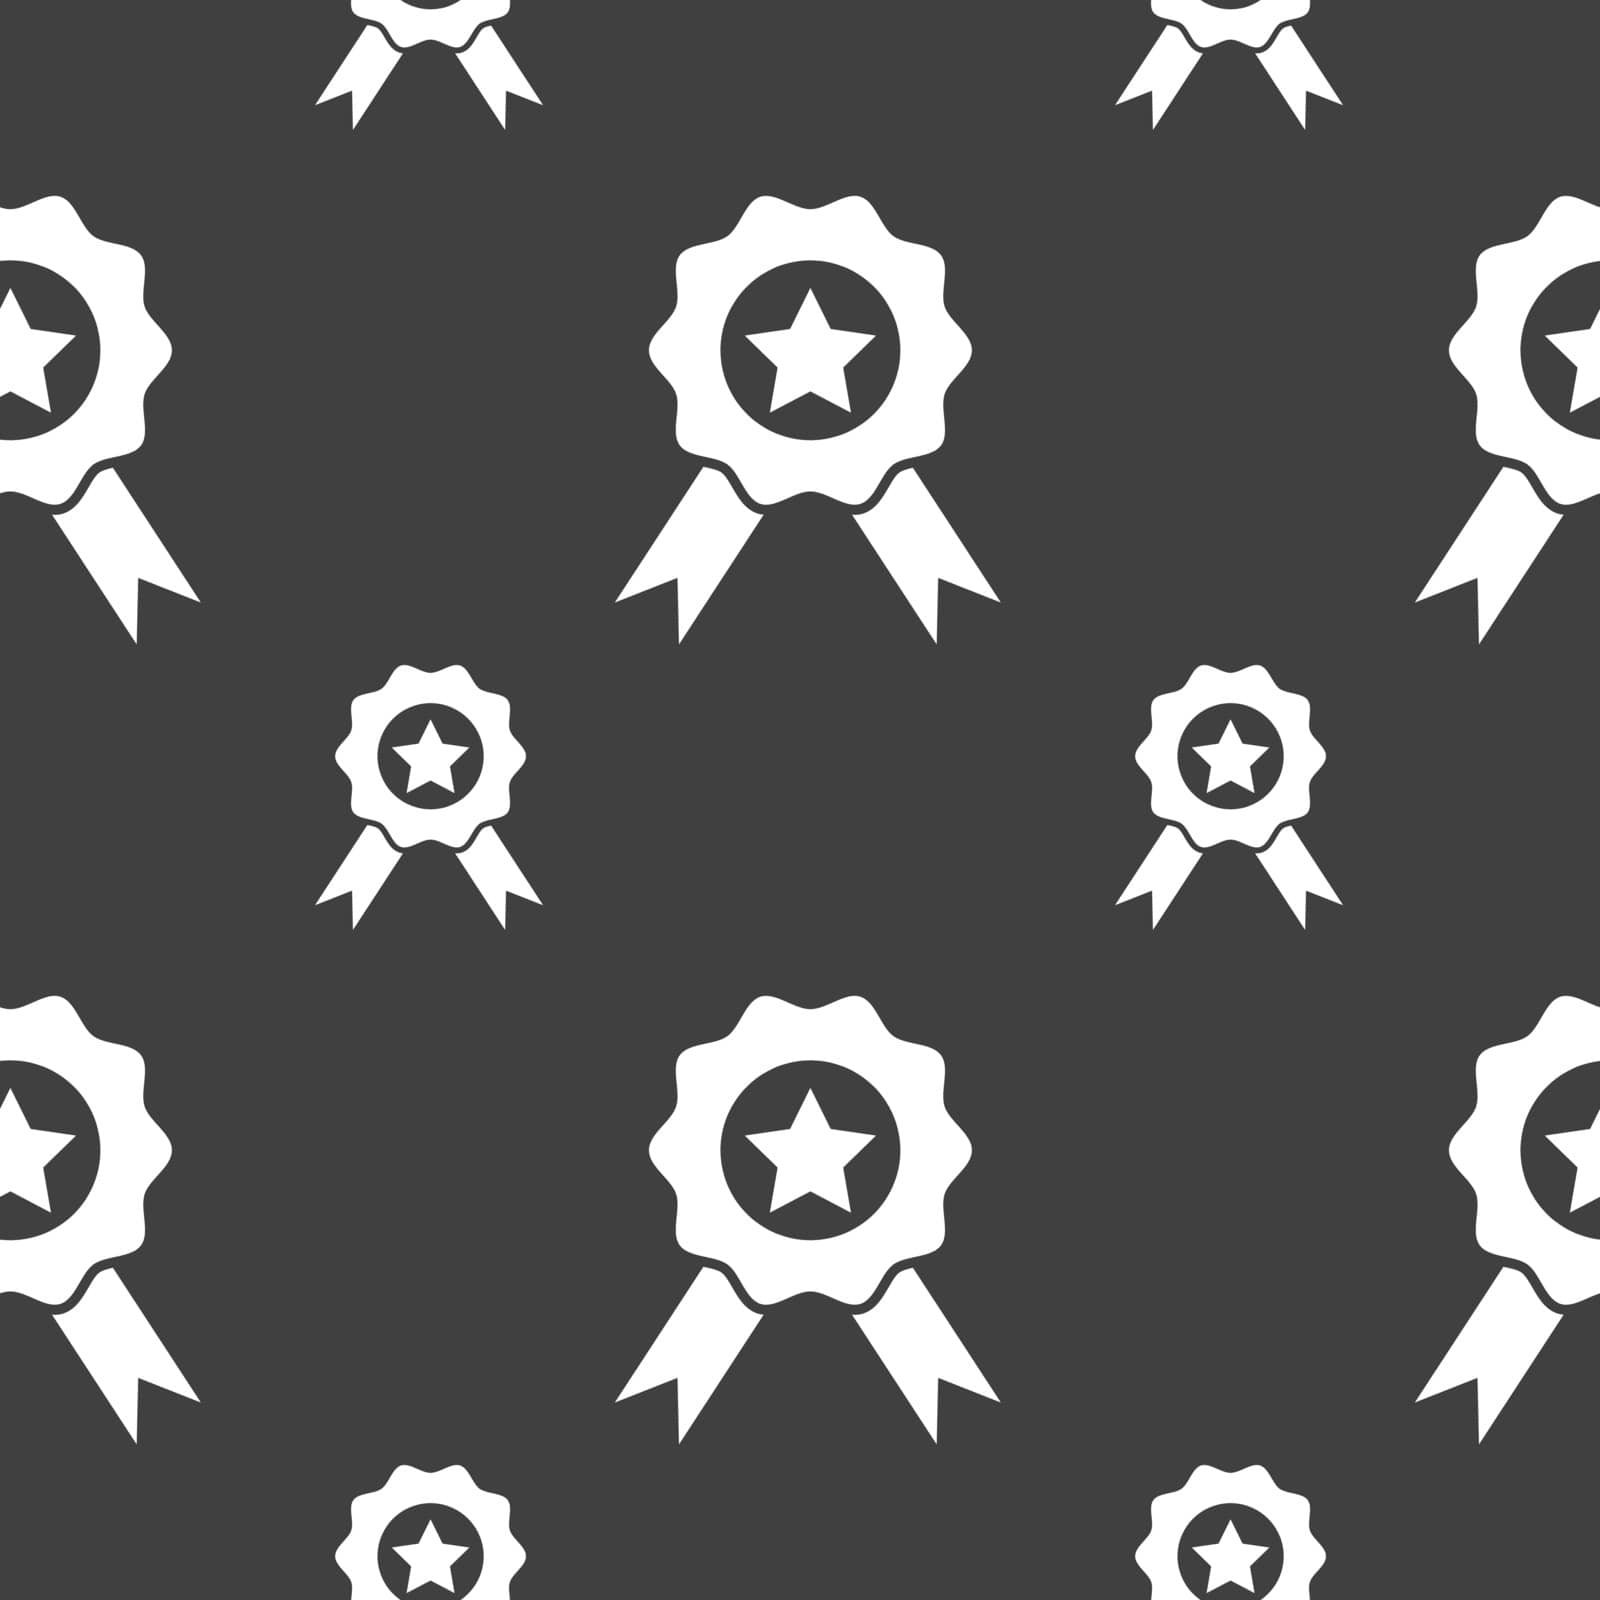 Award, Medal of Honor icon sign. Seamless pattern on a gray background. Vector illustration